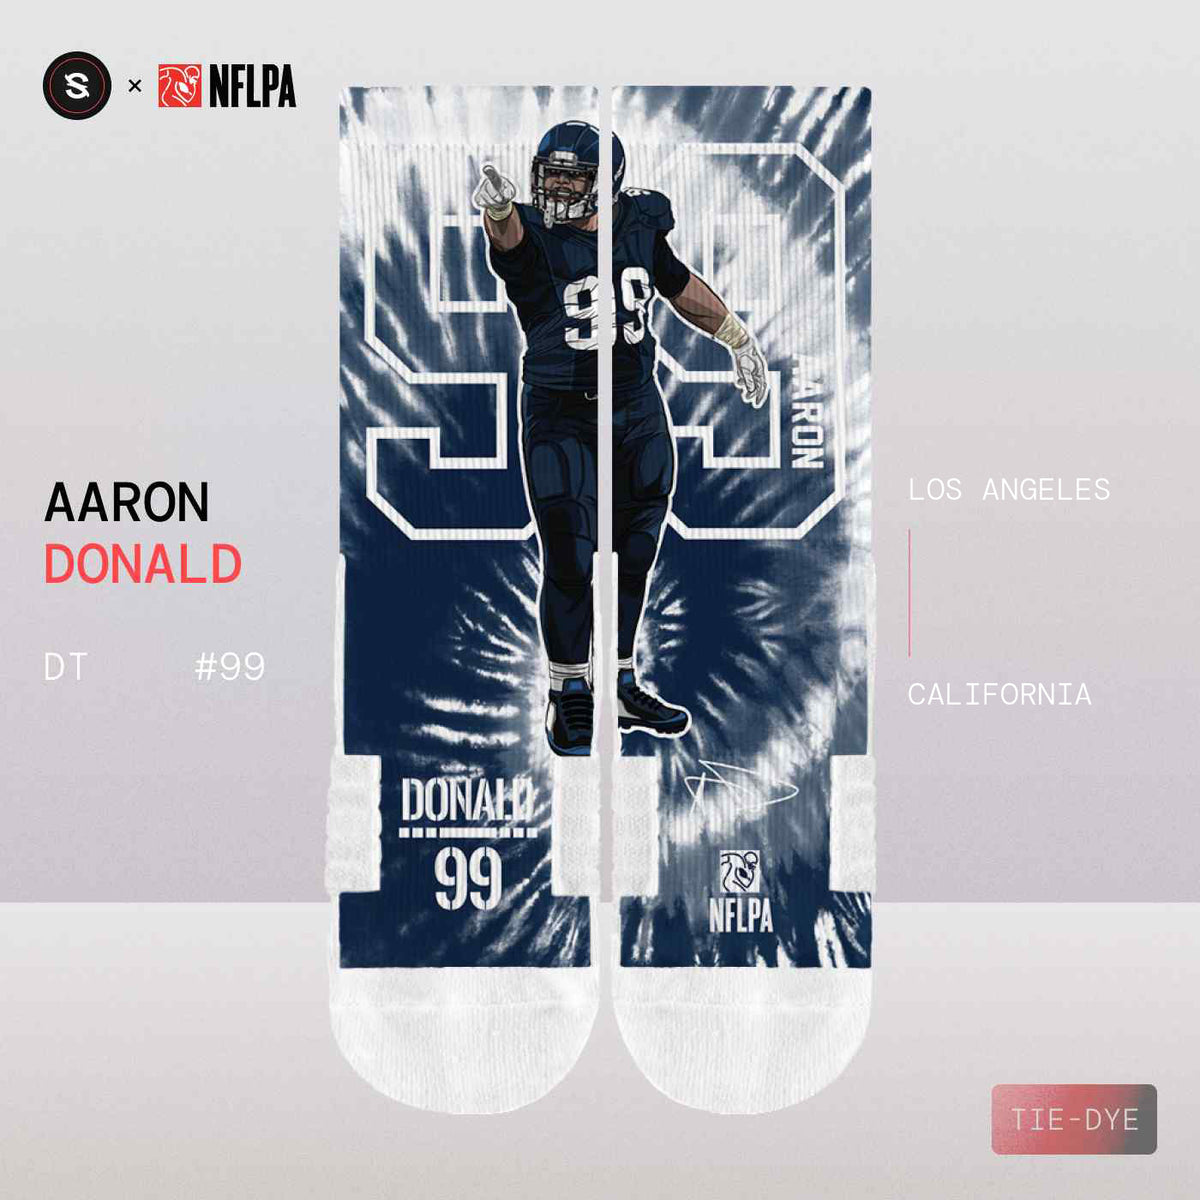 Strideline 🧦 The Most Comfortable Sock on Earth™